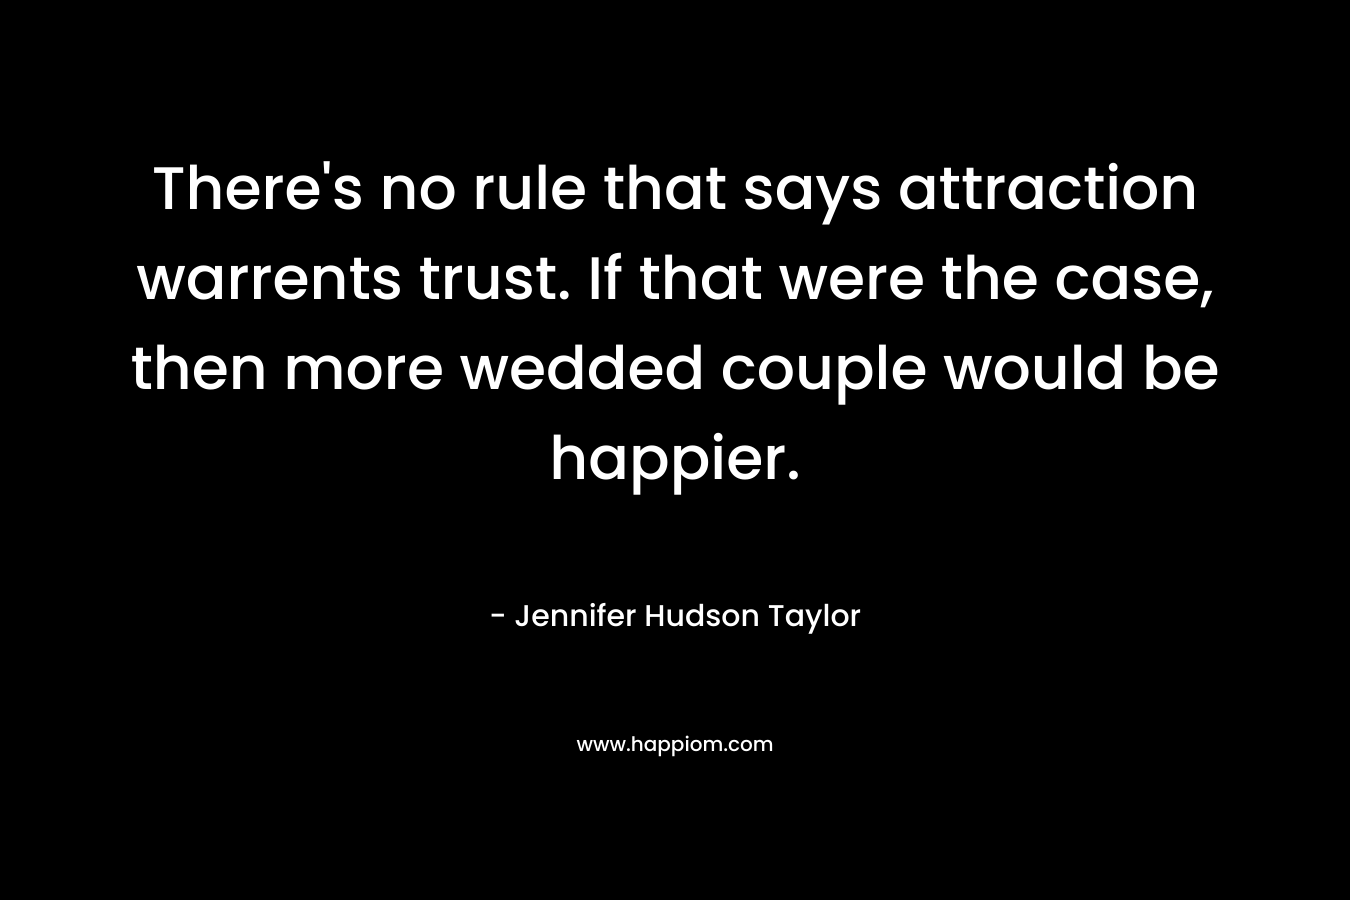 There’s no rule that says attraction warrents trust. If that were the case, then more wedded couple would be happier. – Jennifer Hudson Taylor